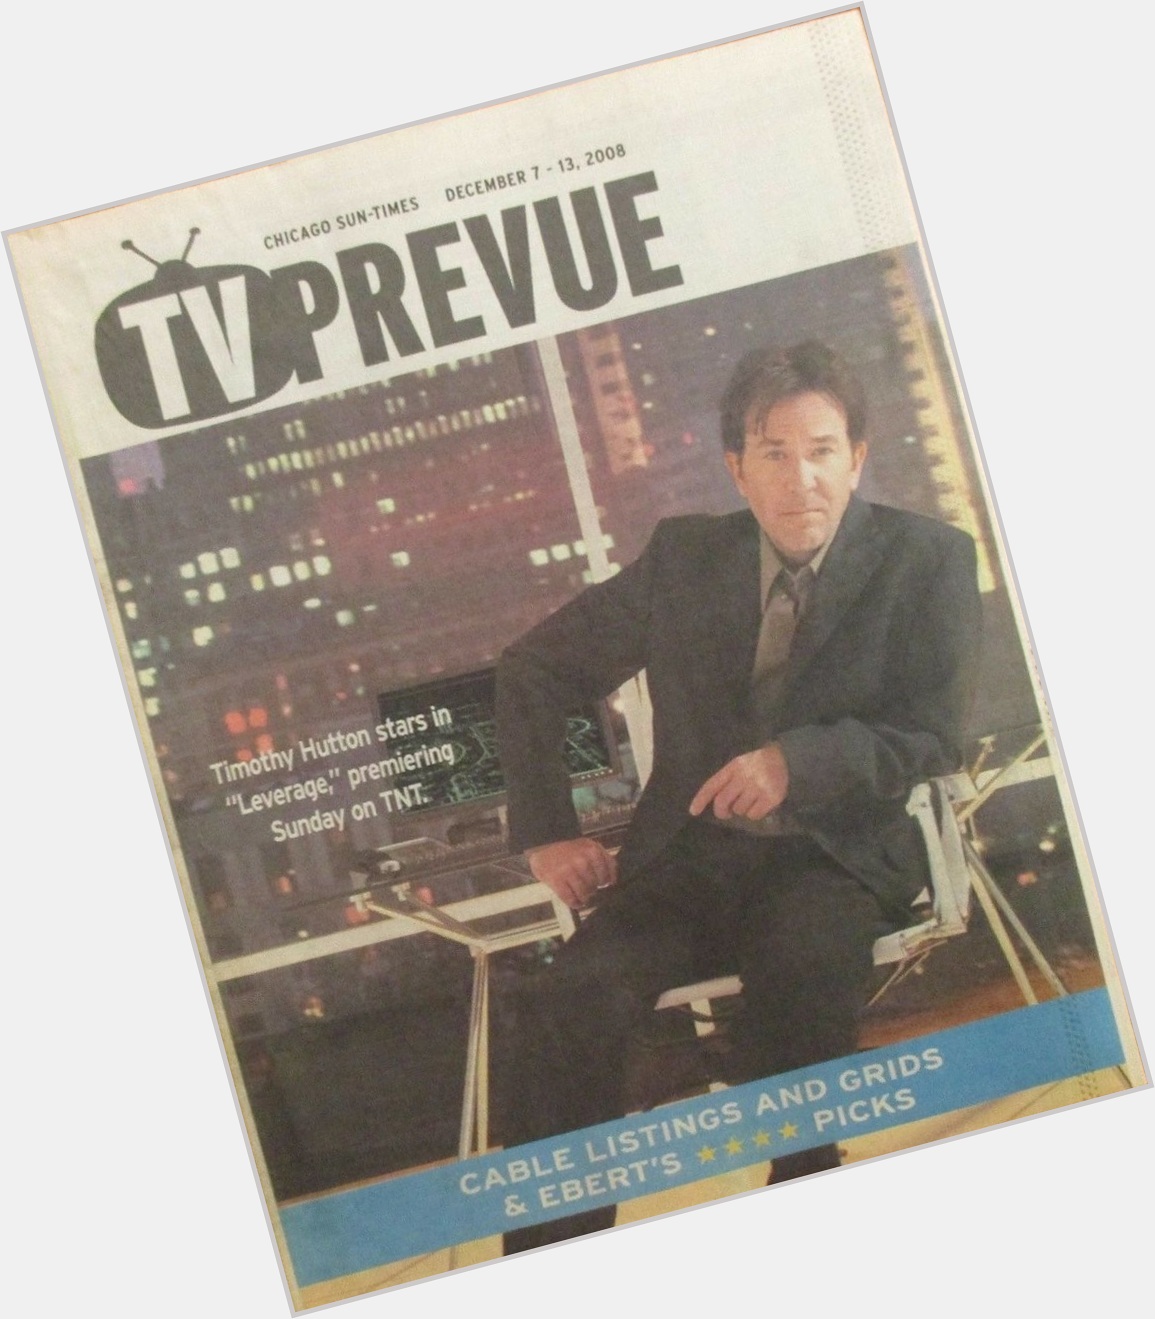 Happy Birthday to Timothy Hutton, born on this date in 1960.
Chicago Sun-Times TV Prevue.  December 7-13, 2008 